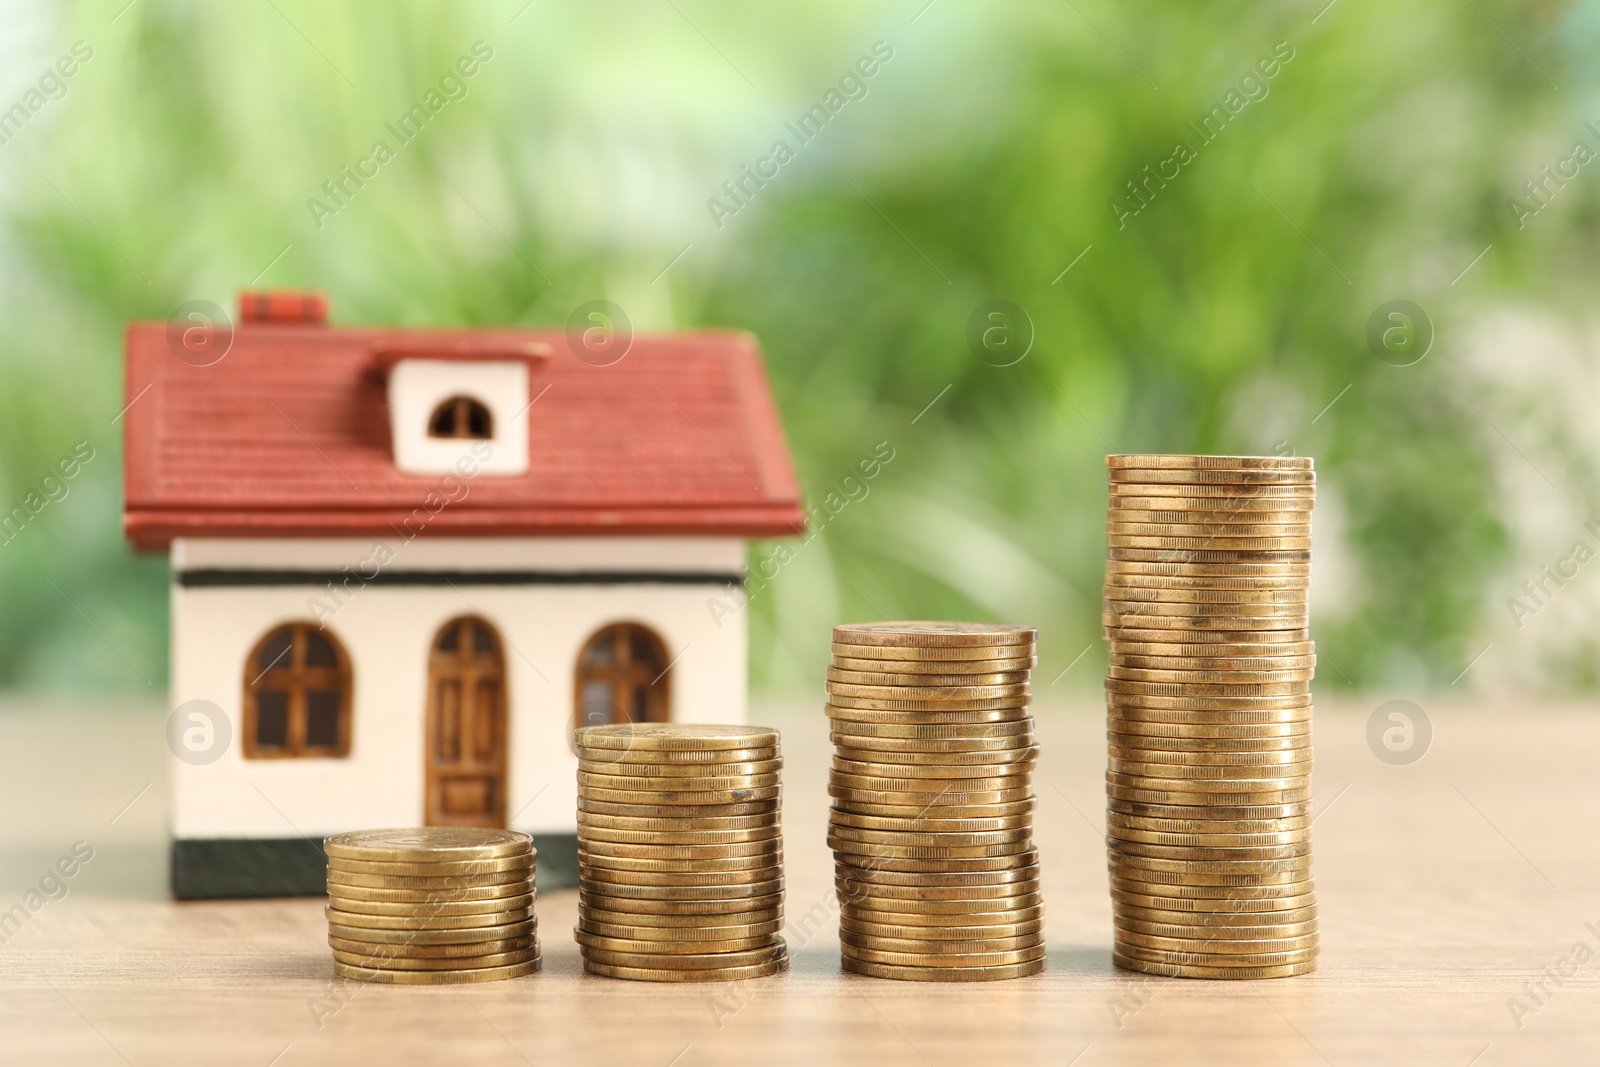 Photo of Mortgage concept. Model house and stacks of coins on wooden table against blurred green background, closeup